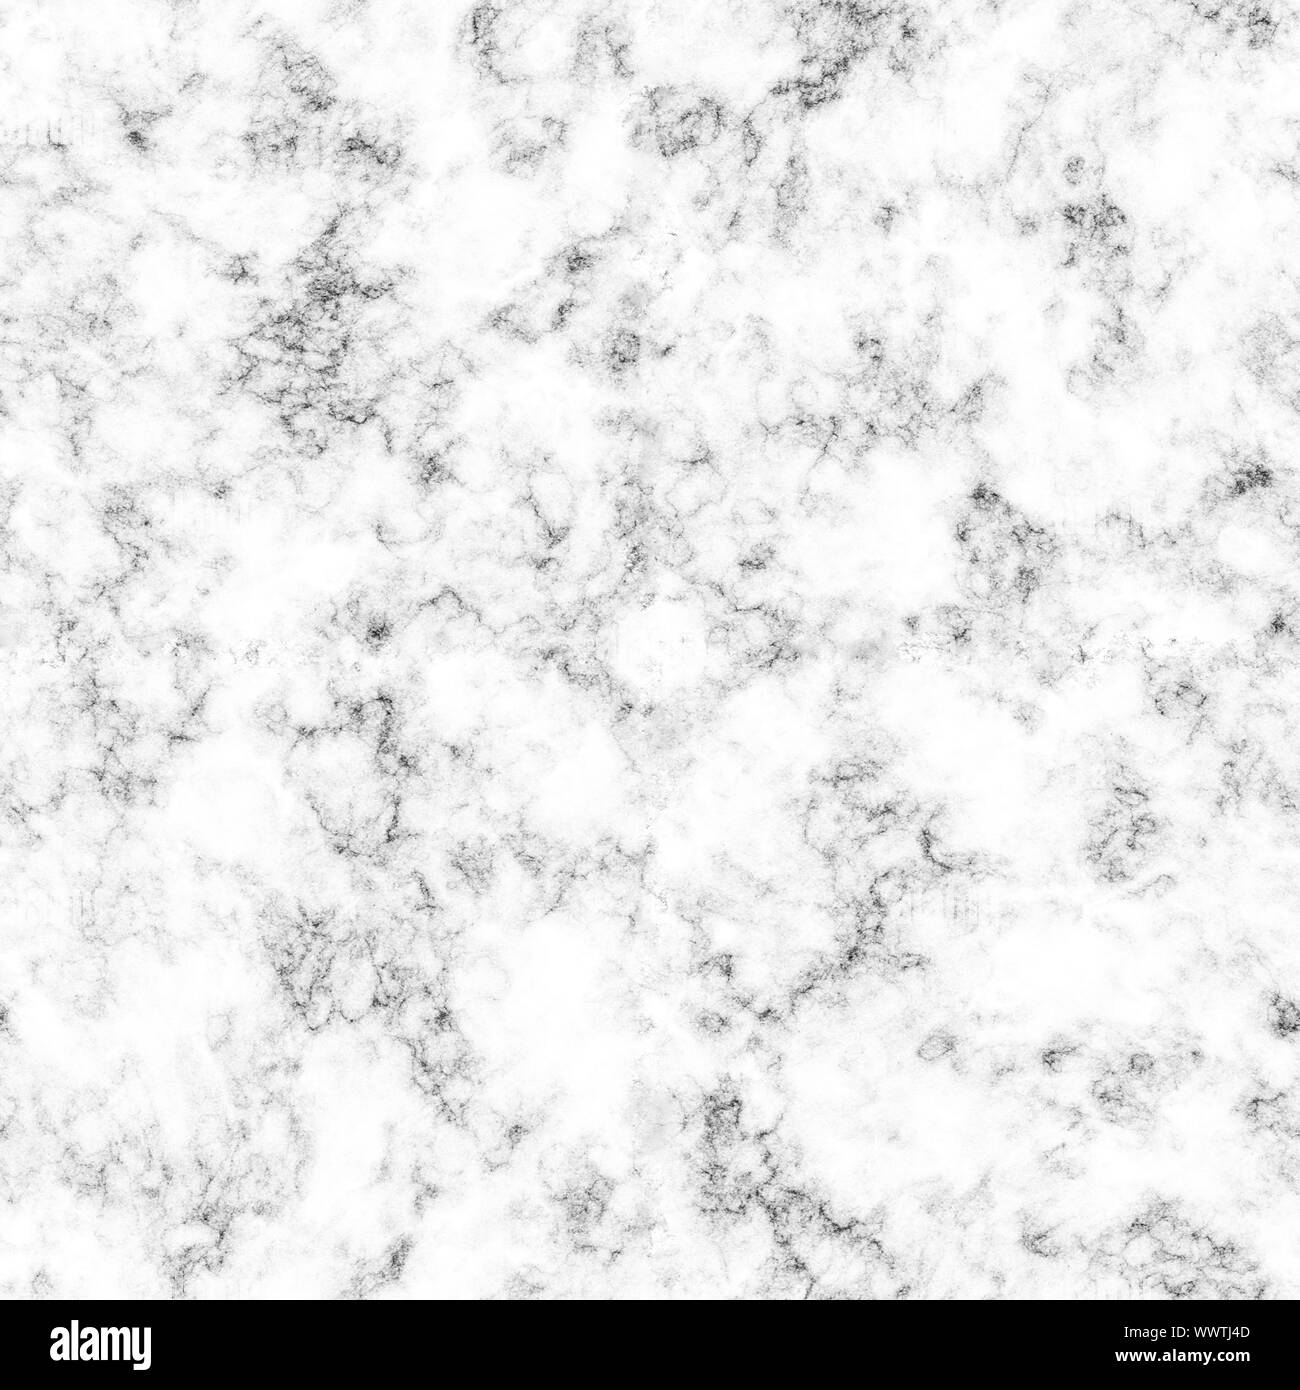 White Marble Texture High Resolution Stock Photography And Images Alamy